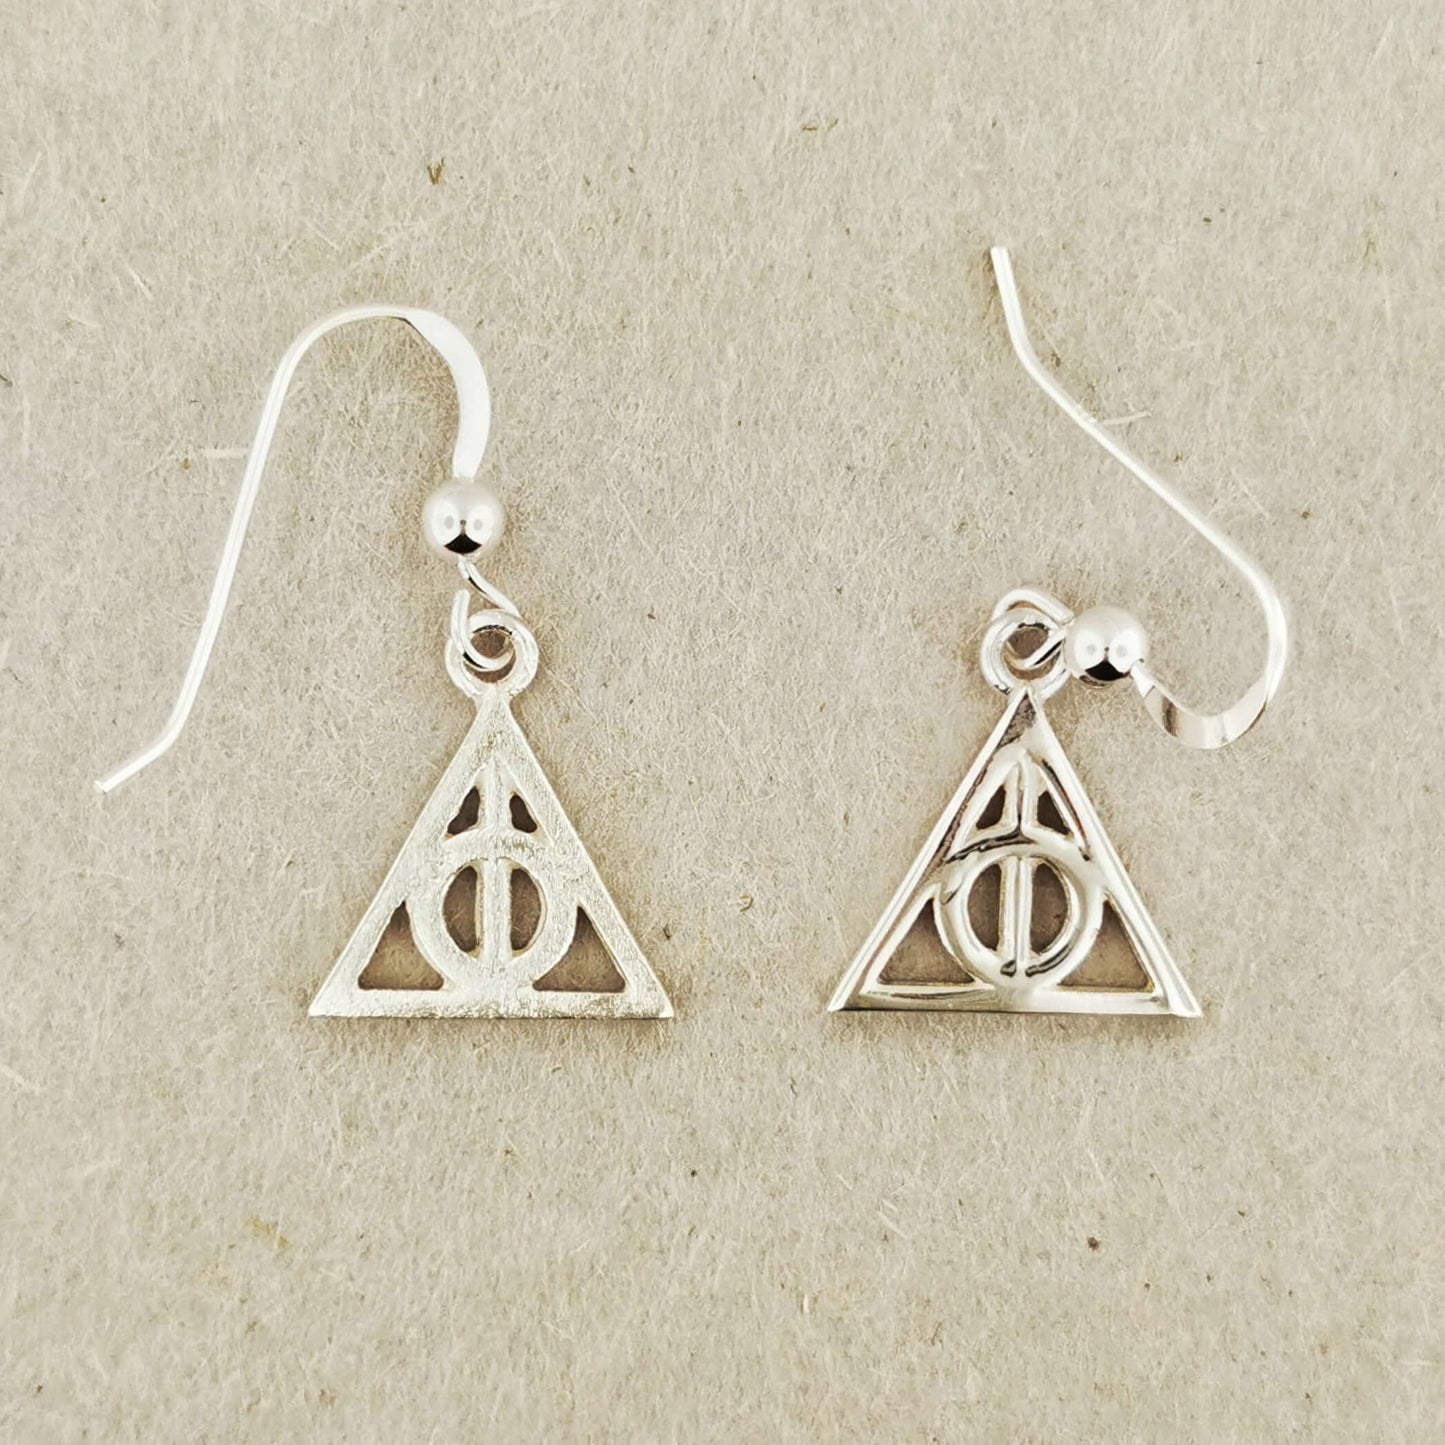 Deathly Wizard Charm Earrings in Sterling Silver or Bronze